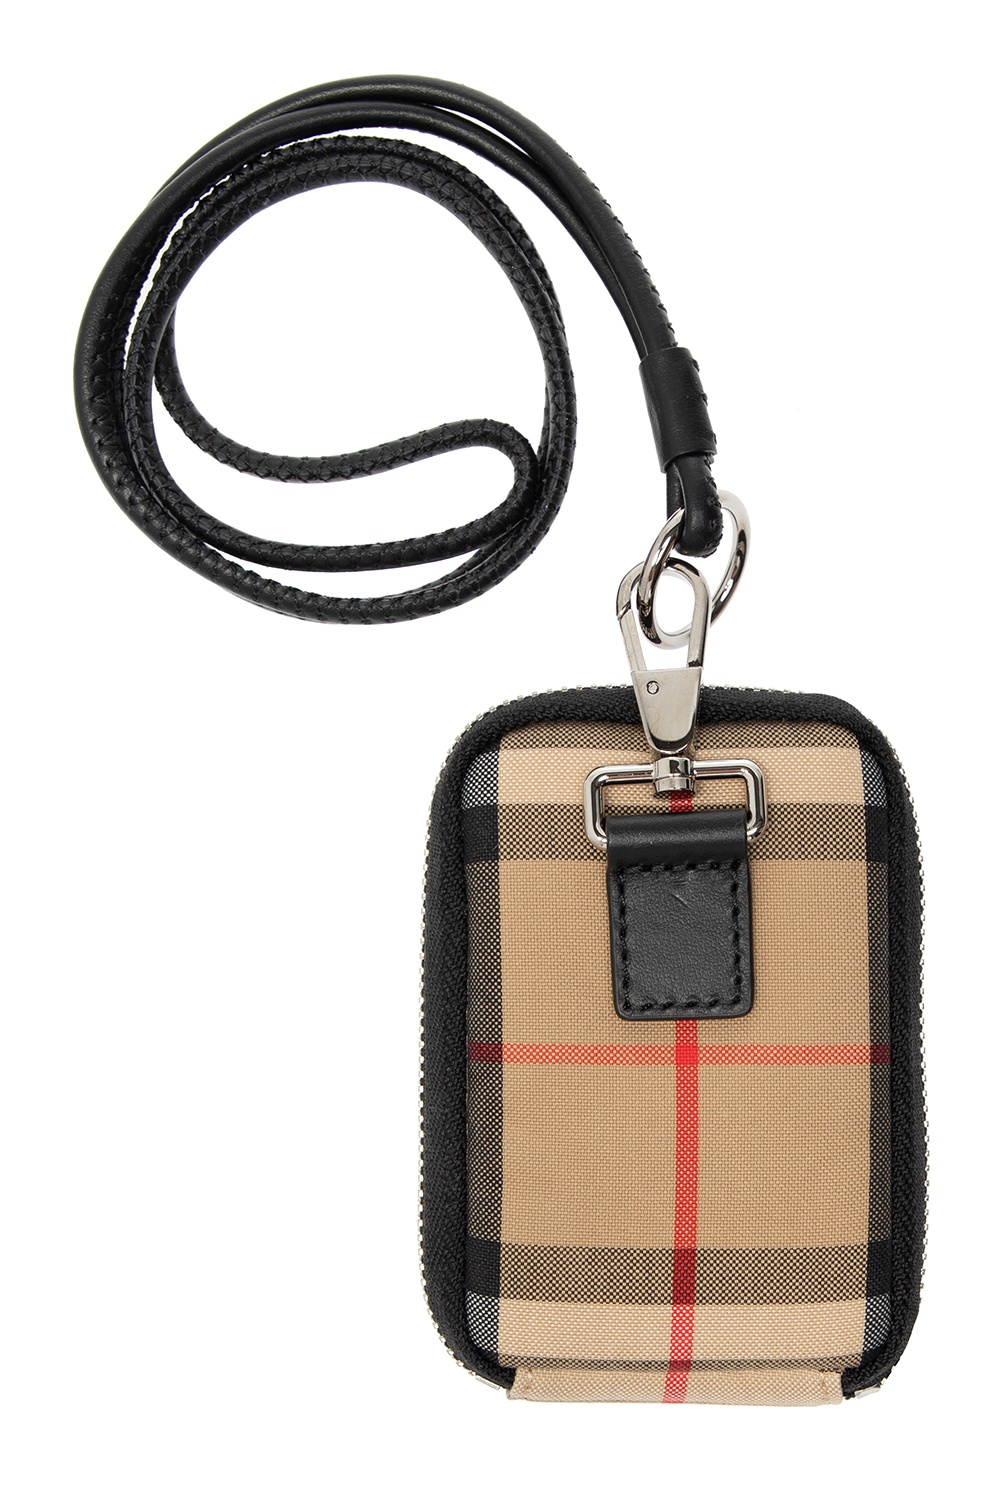 Burberry Card case with lanyard | Men's Accessories | Vitkac